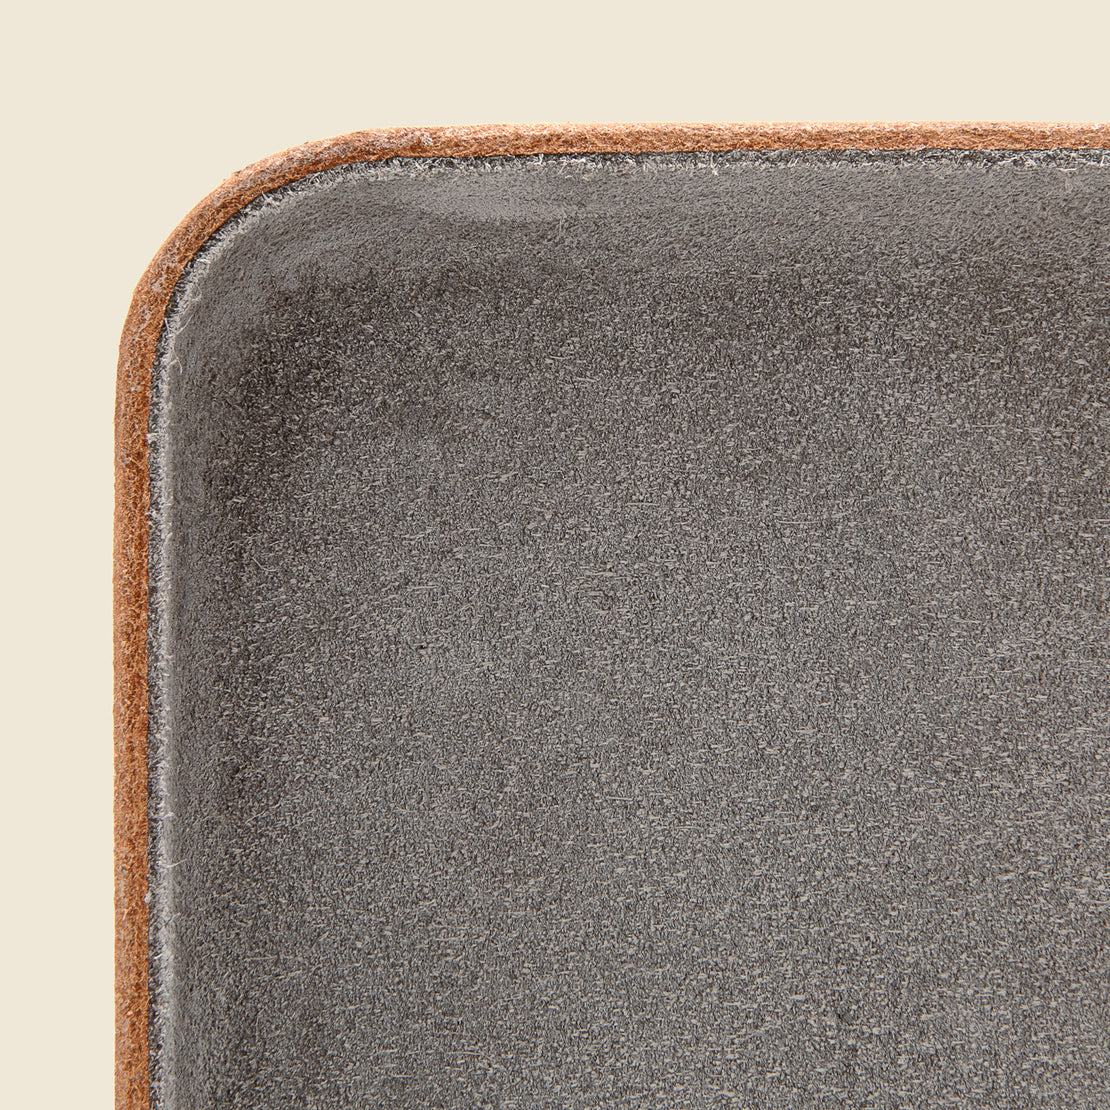 Medium Suede Tray - Grey - Home - STAG Provisions - Home - Art & Accessories - Tray